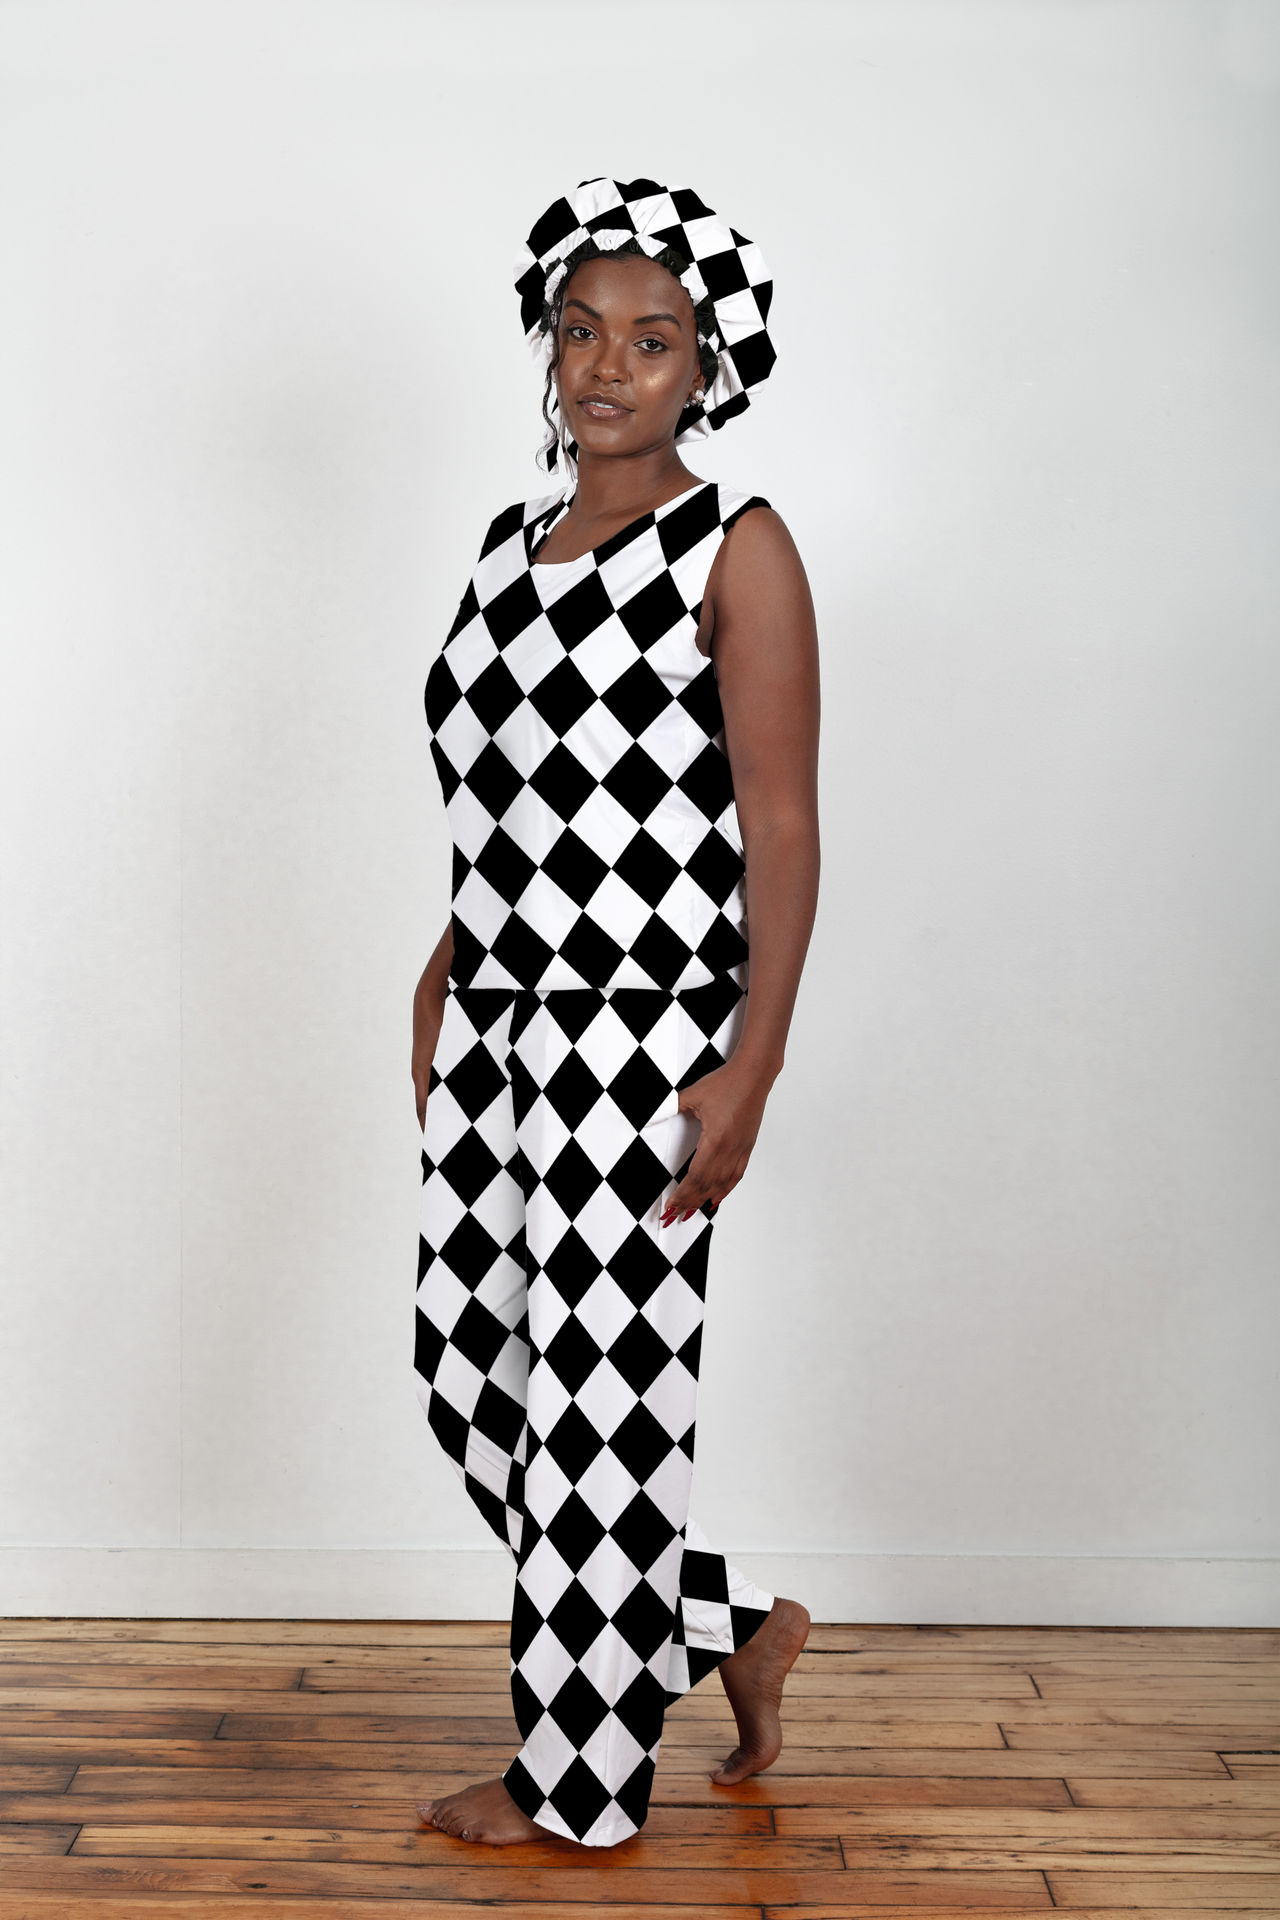 Soft and comfy Bamboo fabric, Black and White Diamond women's sleepwear/loungewear. Women's Pajamas with a Matching satin-lined bonnet.